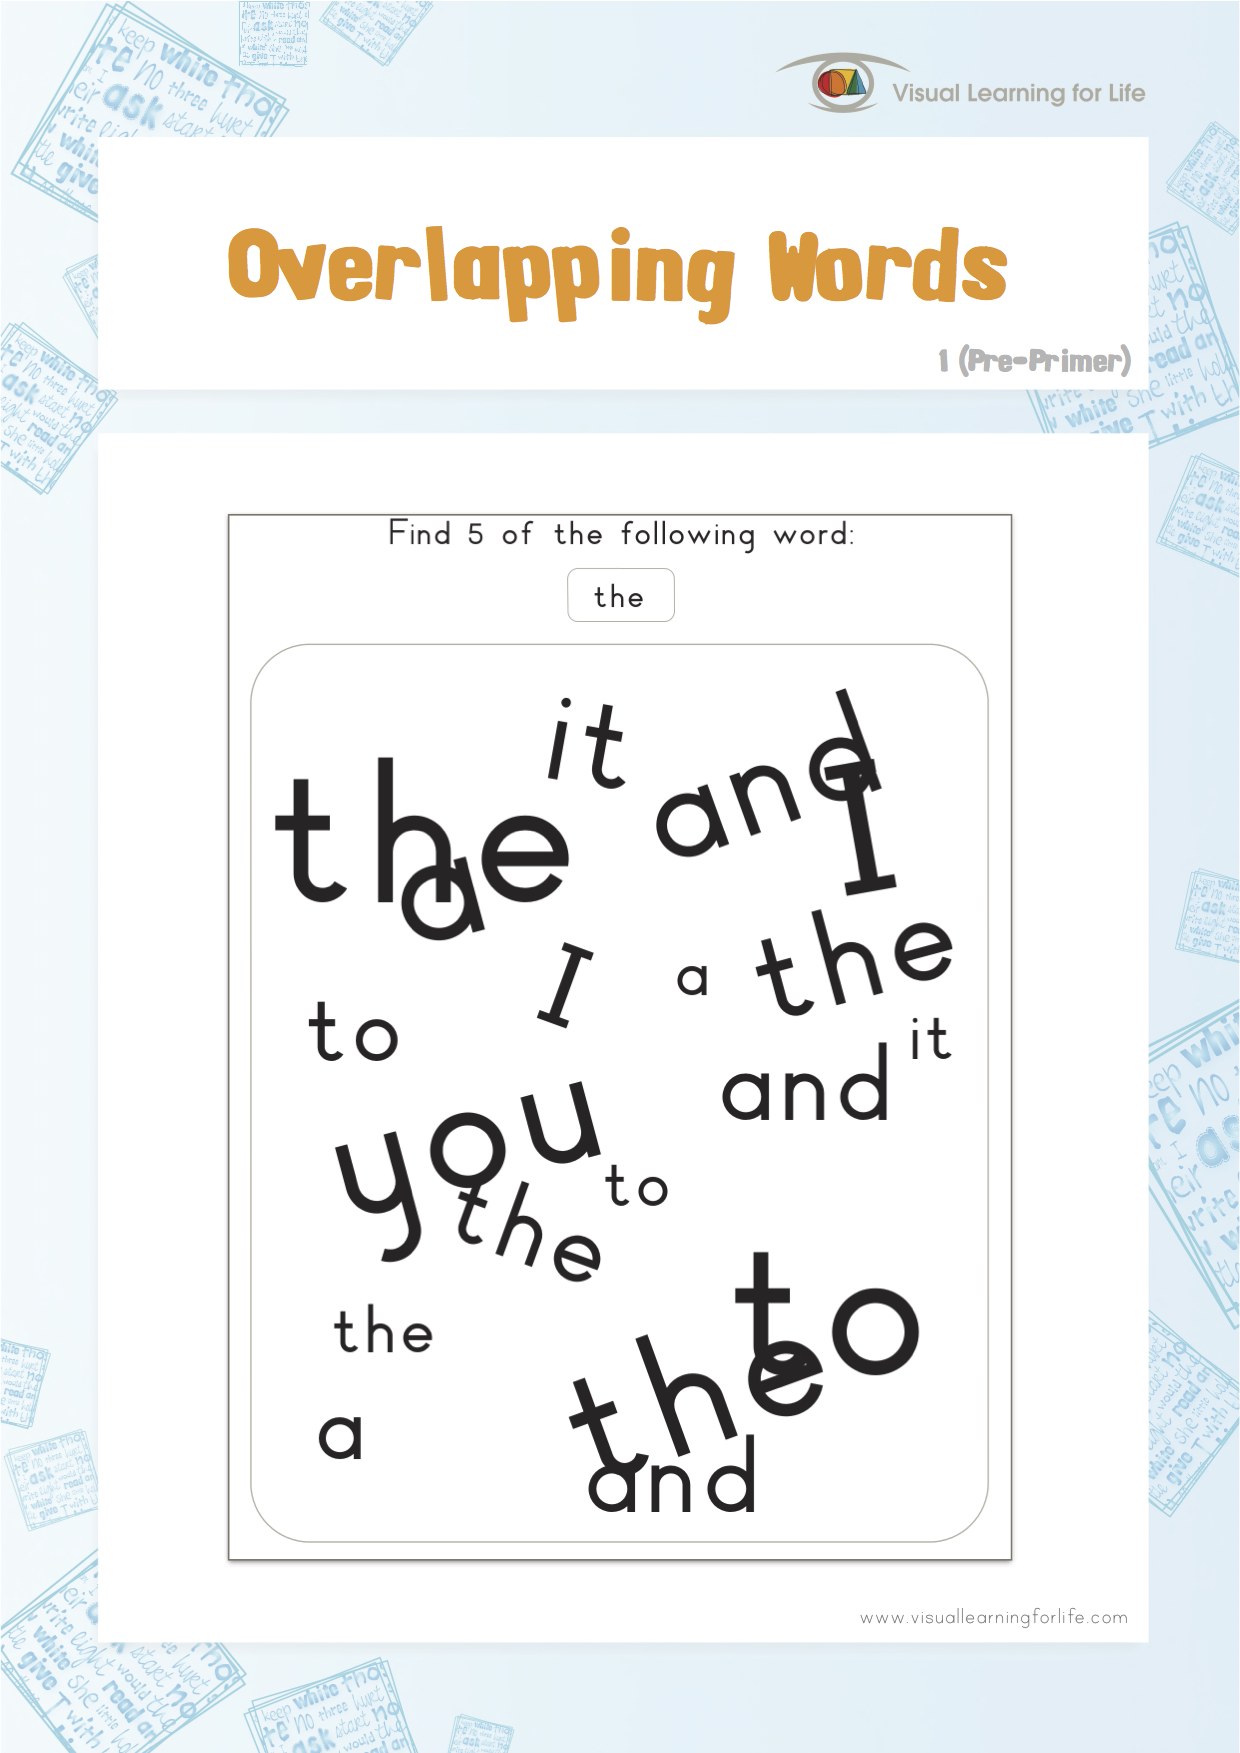 Overlapping Words 1